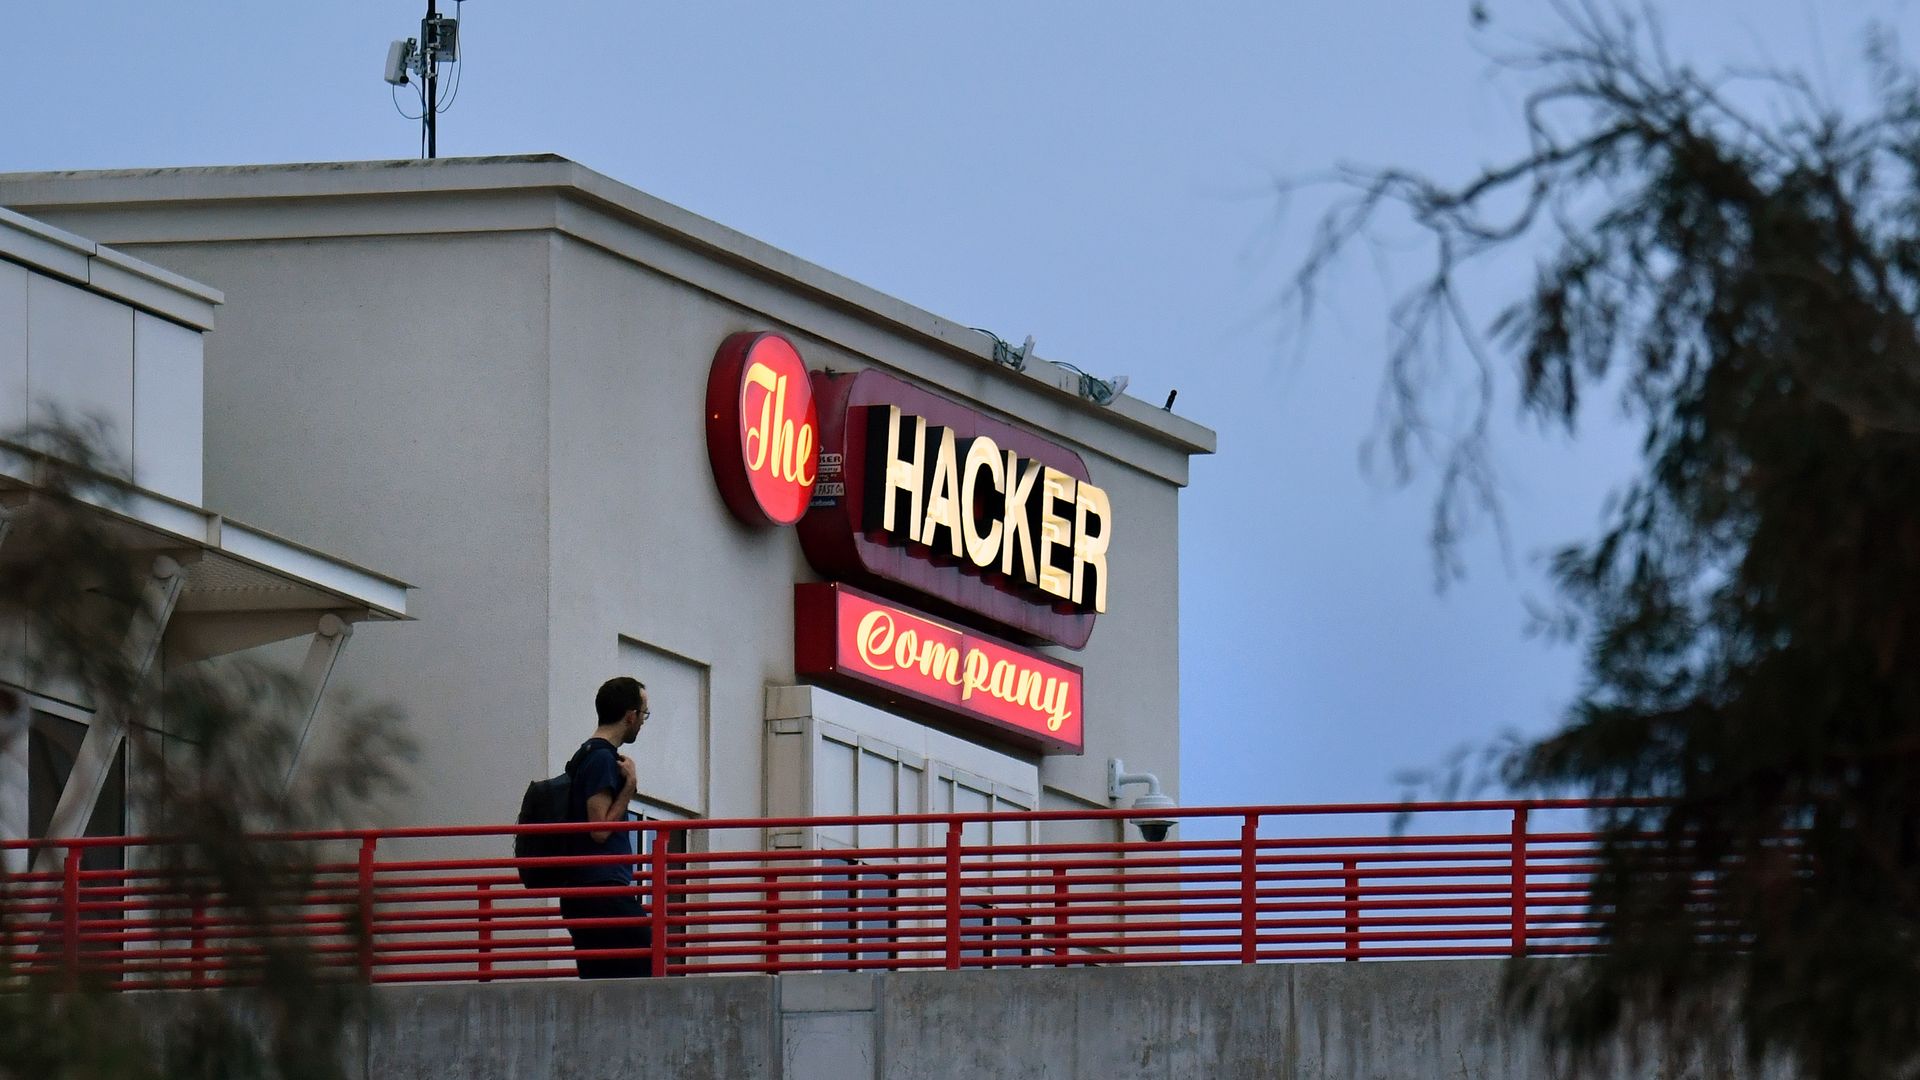 A sign at Facebook HQ reads "The Hacker Company"